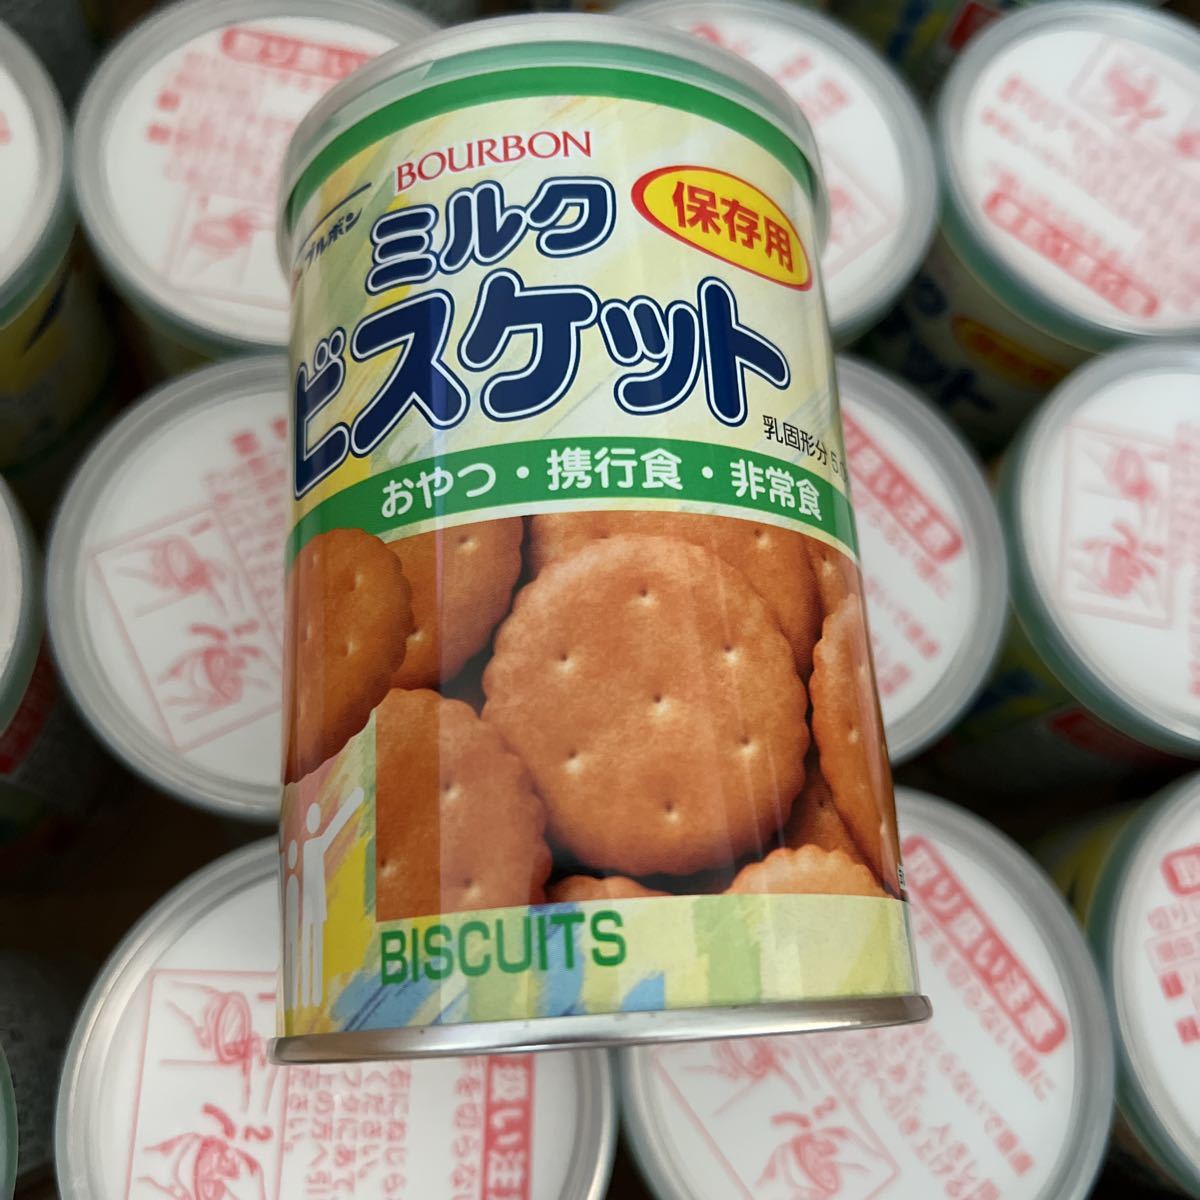  with translation brubon emergency rations milk biscuit preservation for best-before date 2022 year 7 month 4 day BOURBON 24 can best-before date short . therefore attention please biscuit confection 